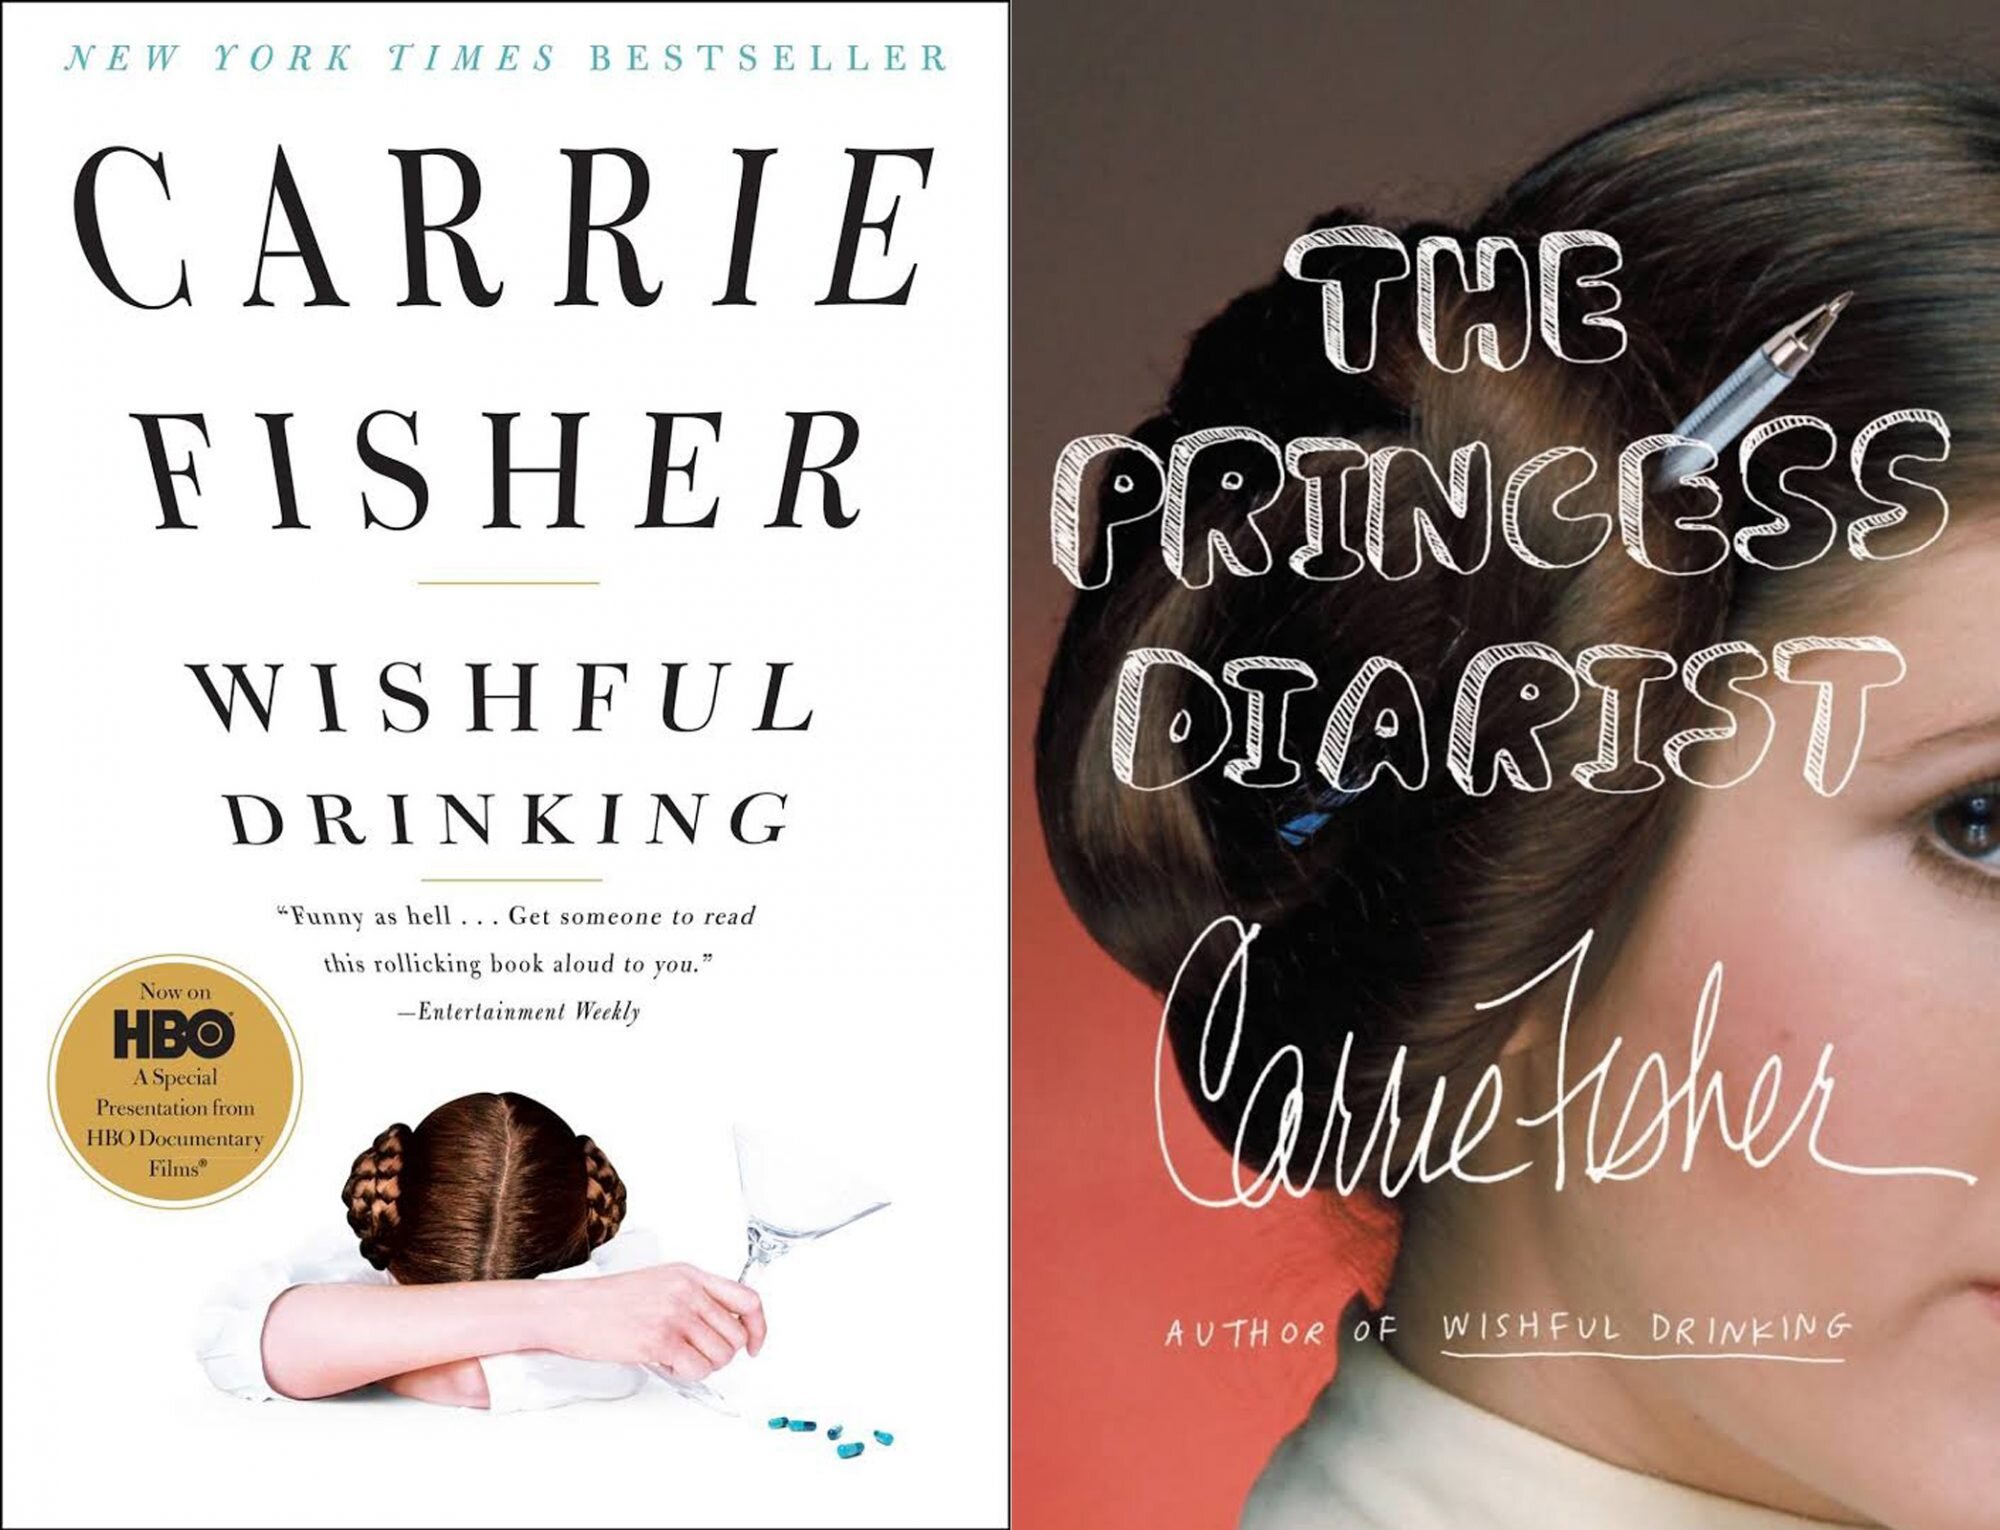 EW: Remembering Carrie Fisher's literary career